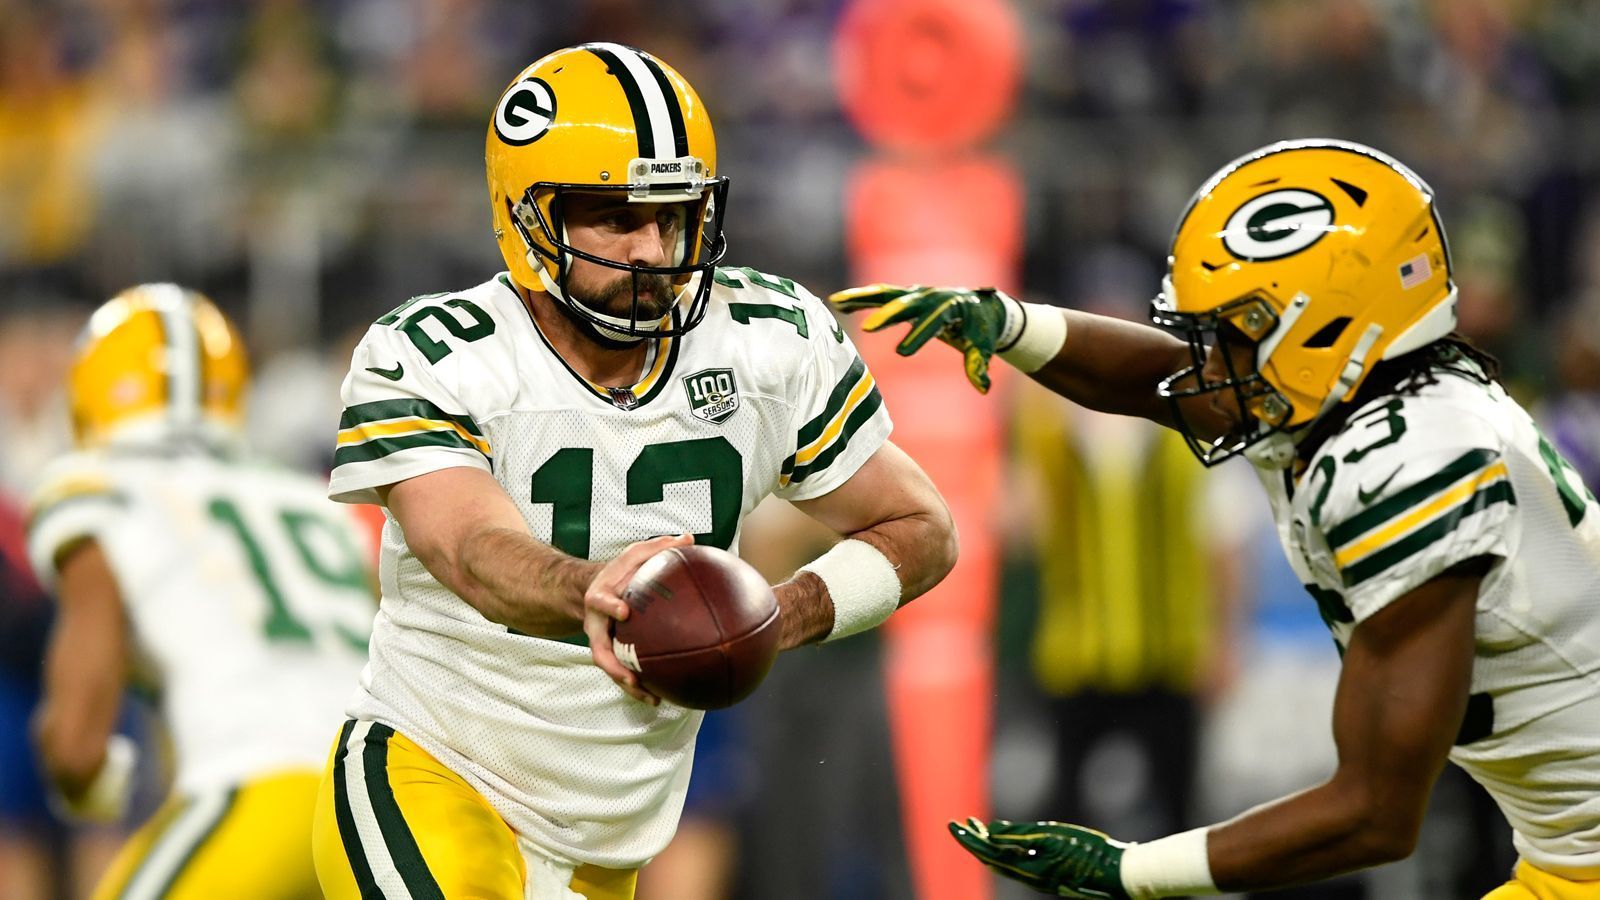 <strong>Green Bay Packers</strong><br>
                Platz 1: Green Bay Packers – 35-mal in den Playoffs
